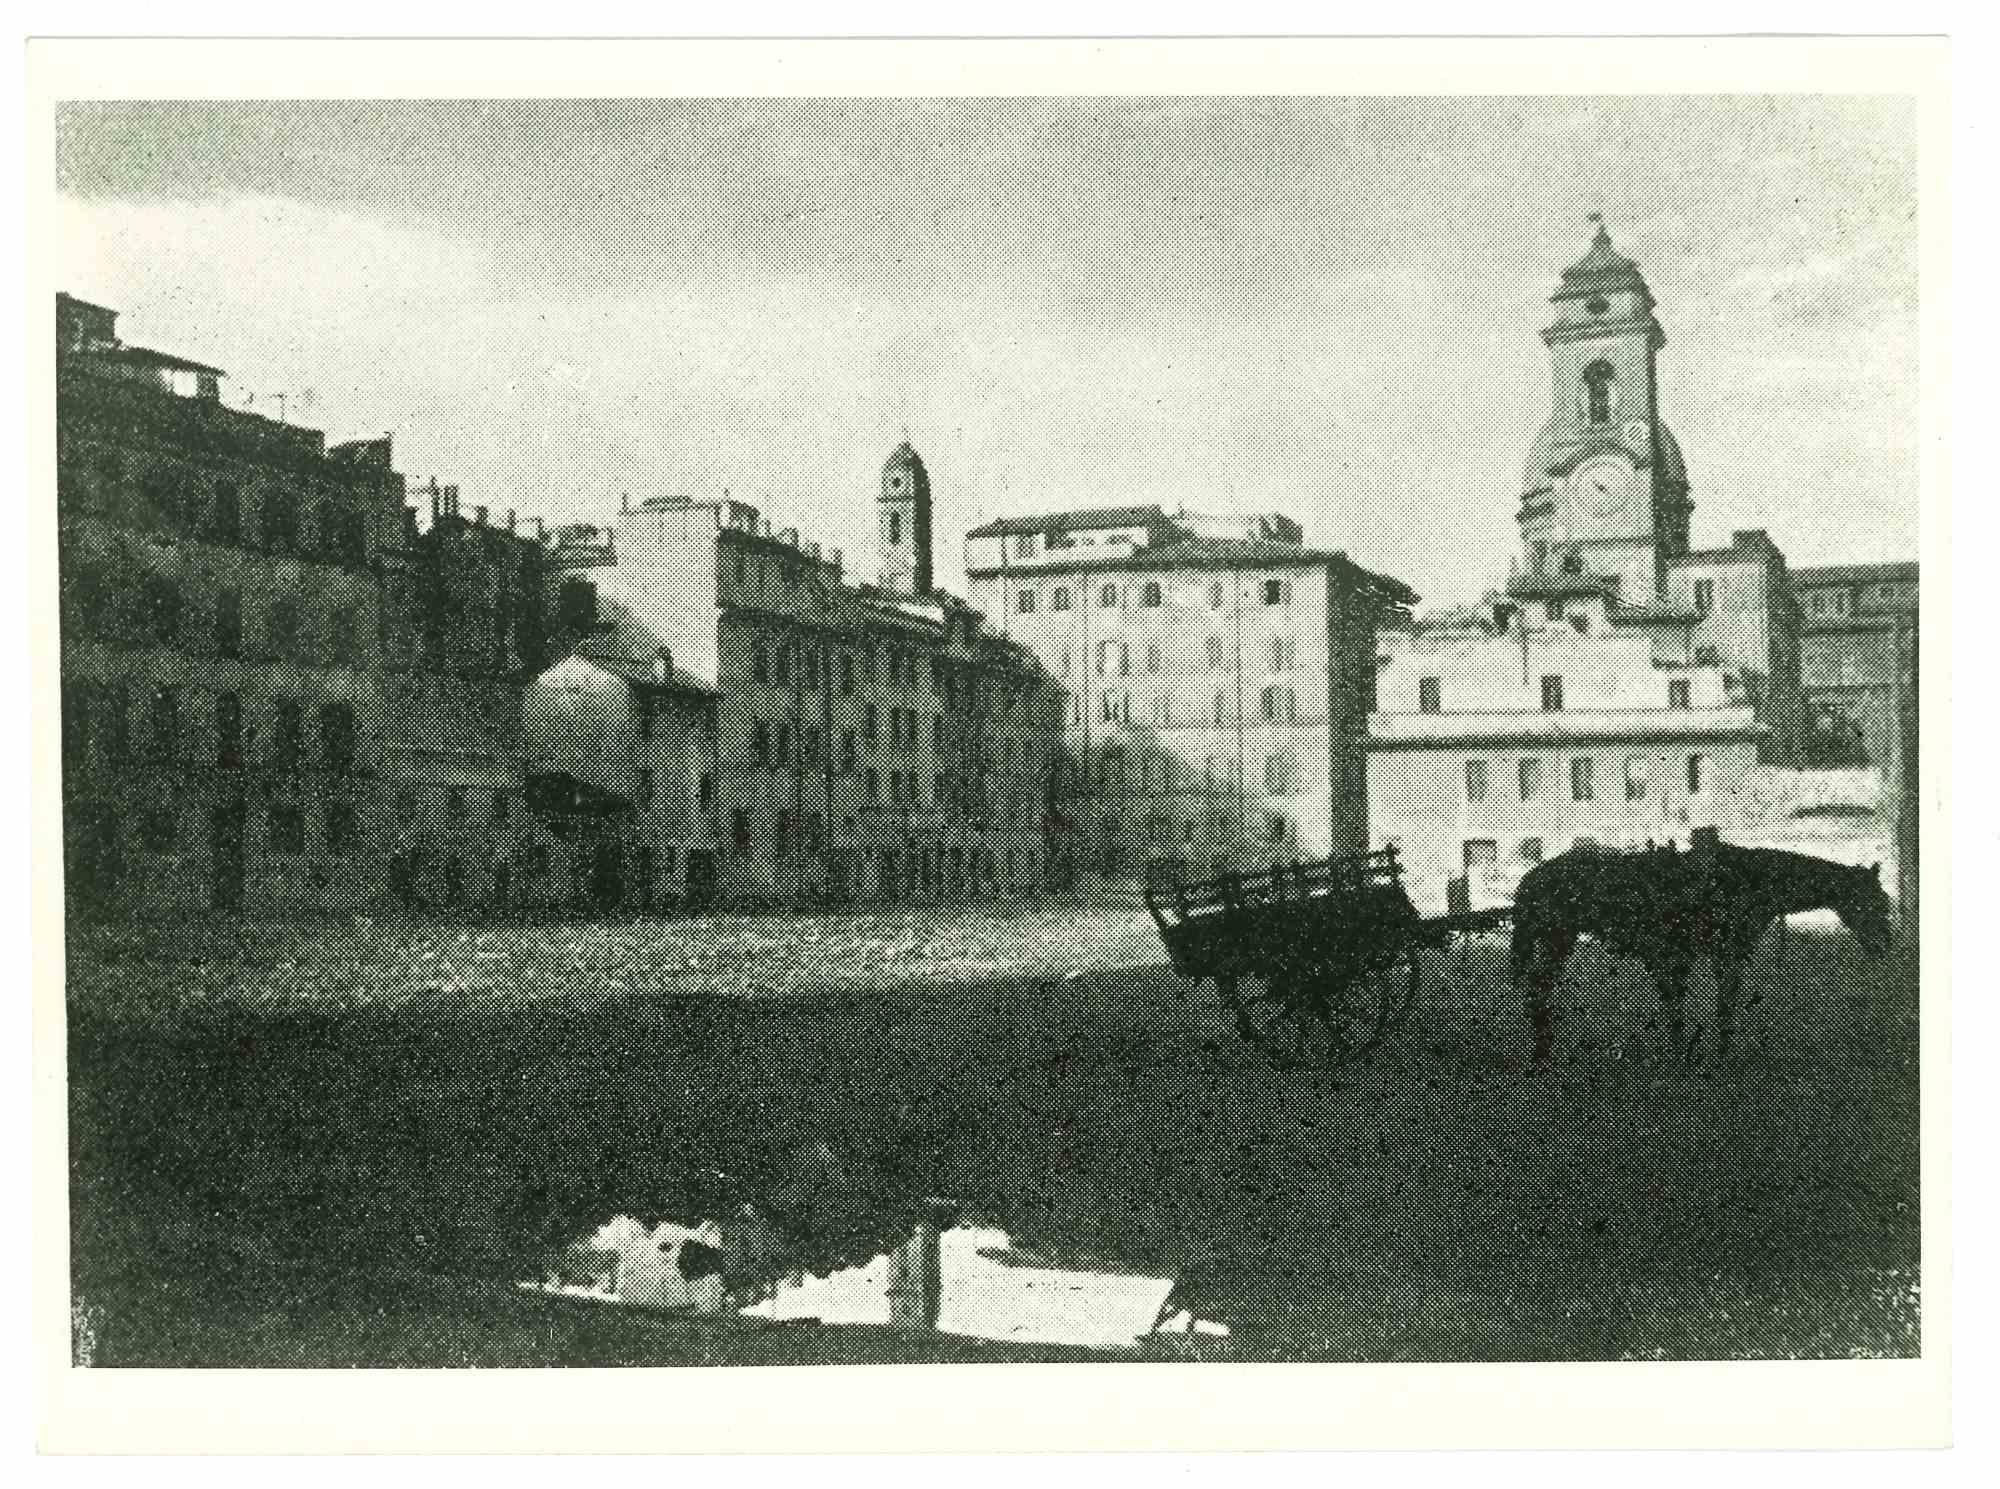 Unknown Landscape Photograph - The Historical Roman Square - Vintage Photograph - Early 20th Century